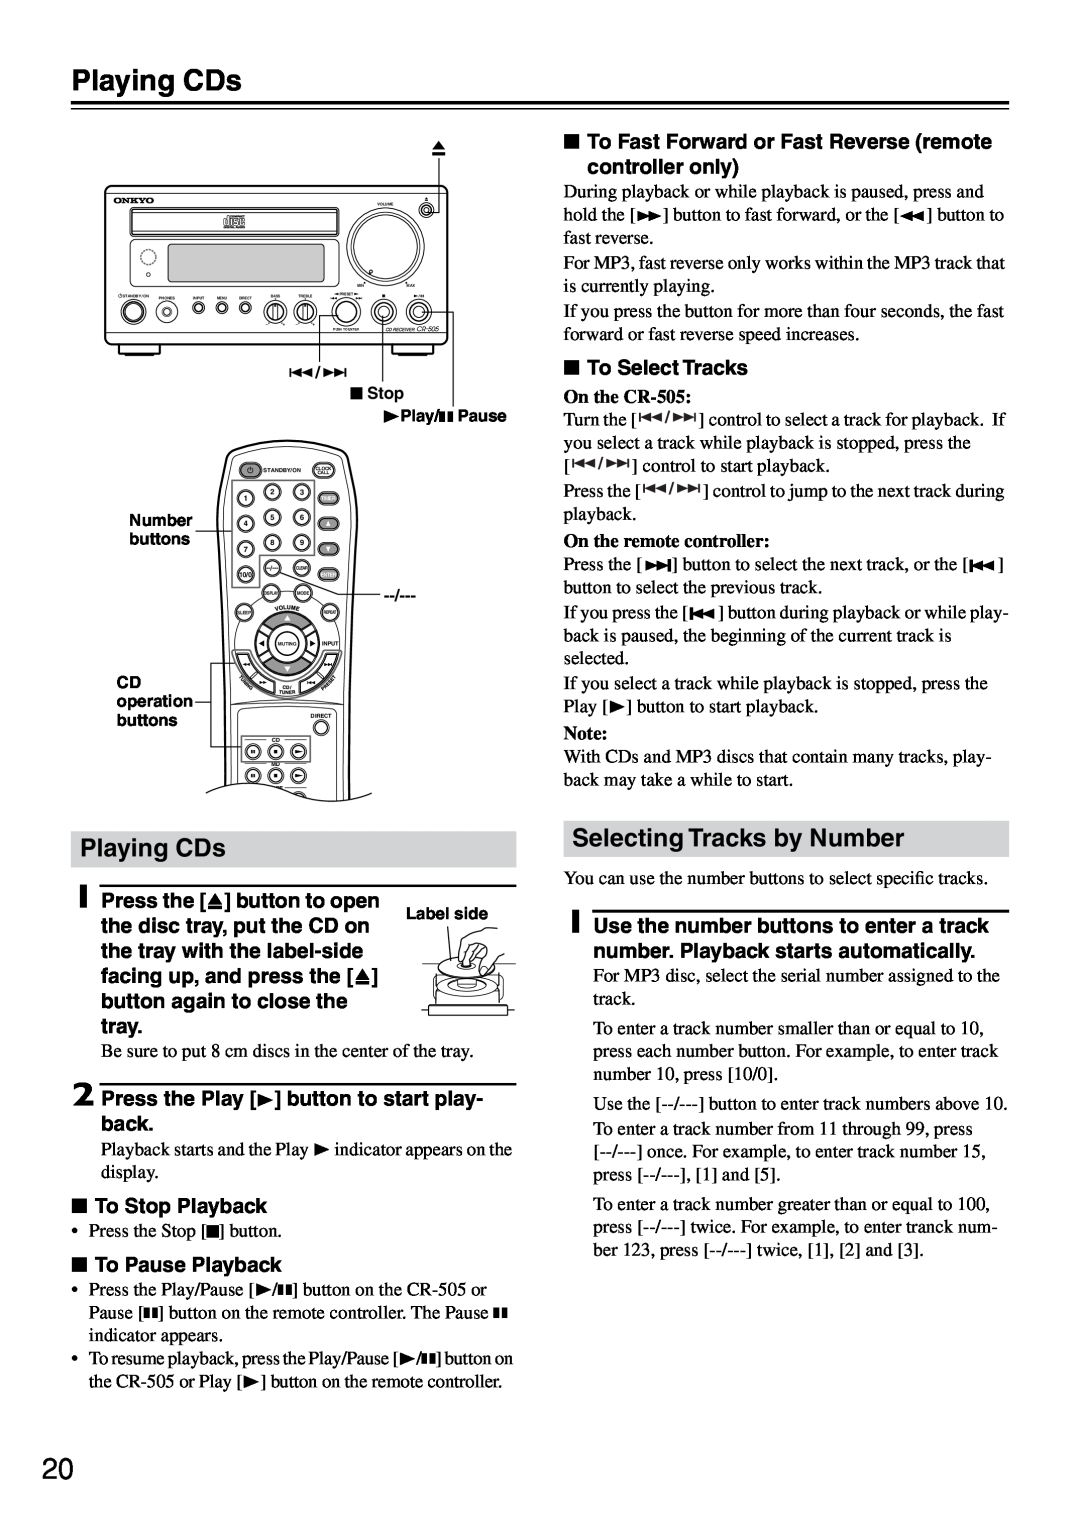 Onkyo CR-505 instruction manual Playing CDs, Selecting Tracks by Number 